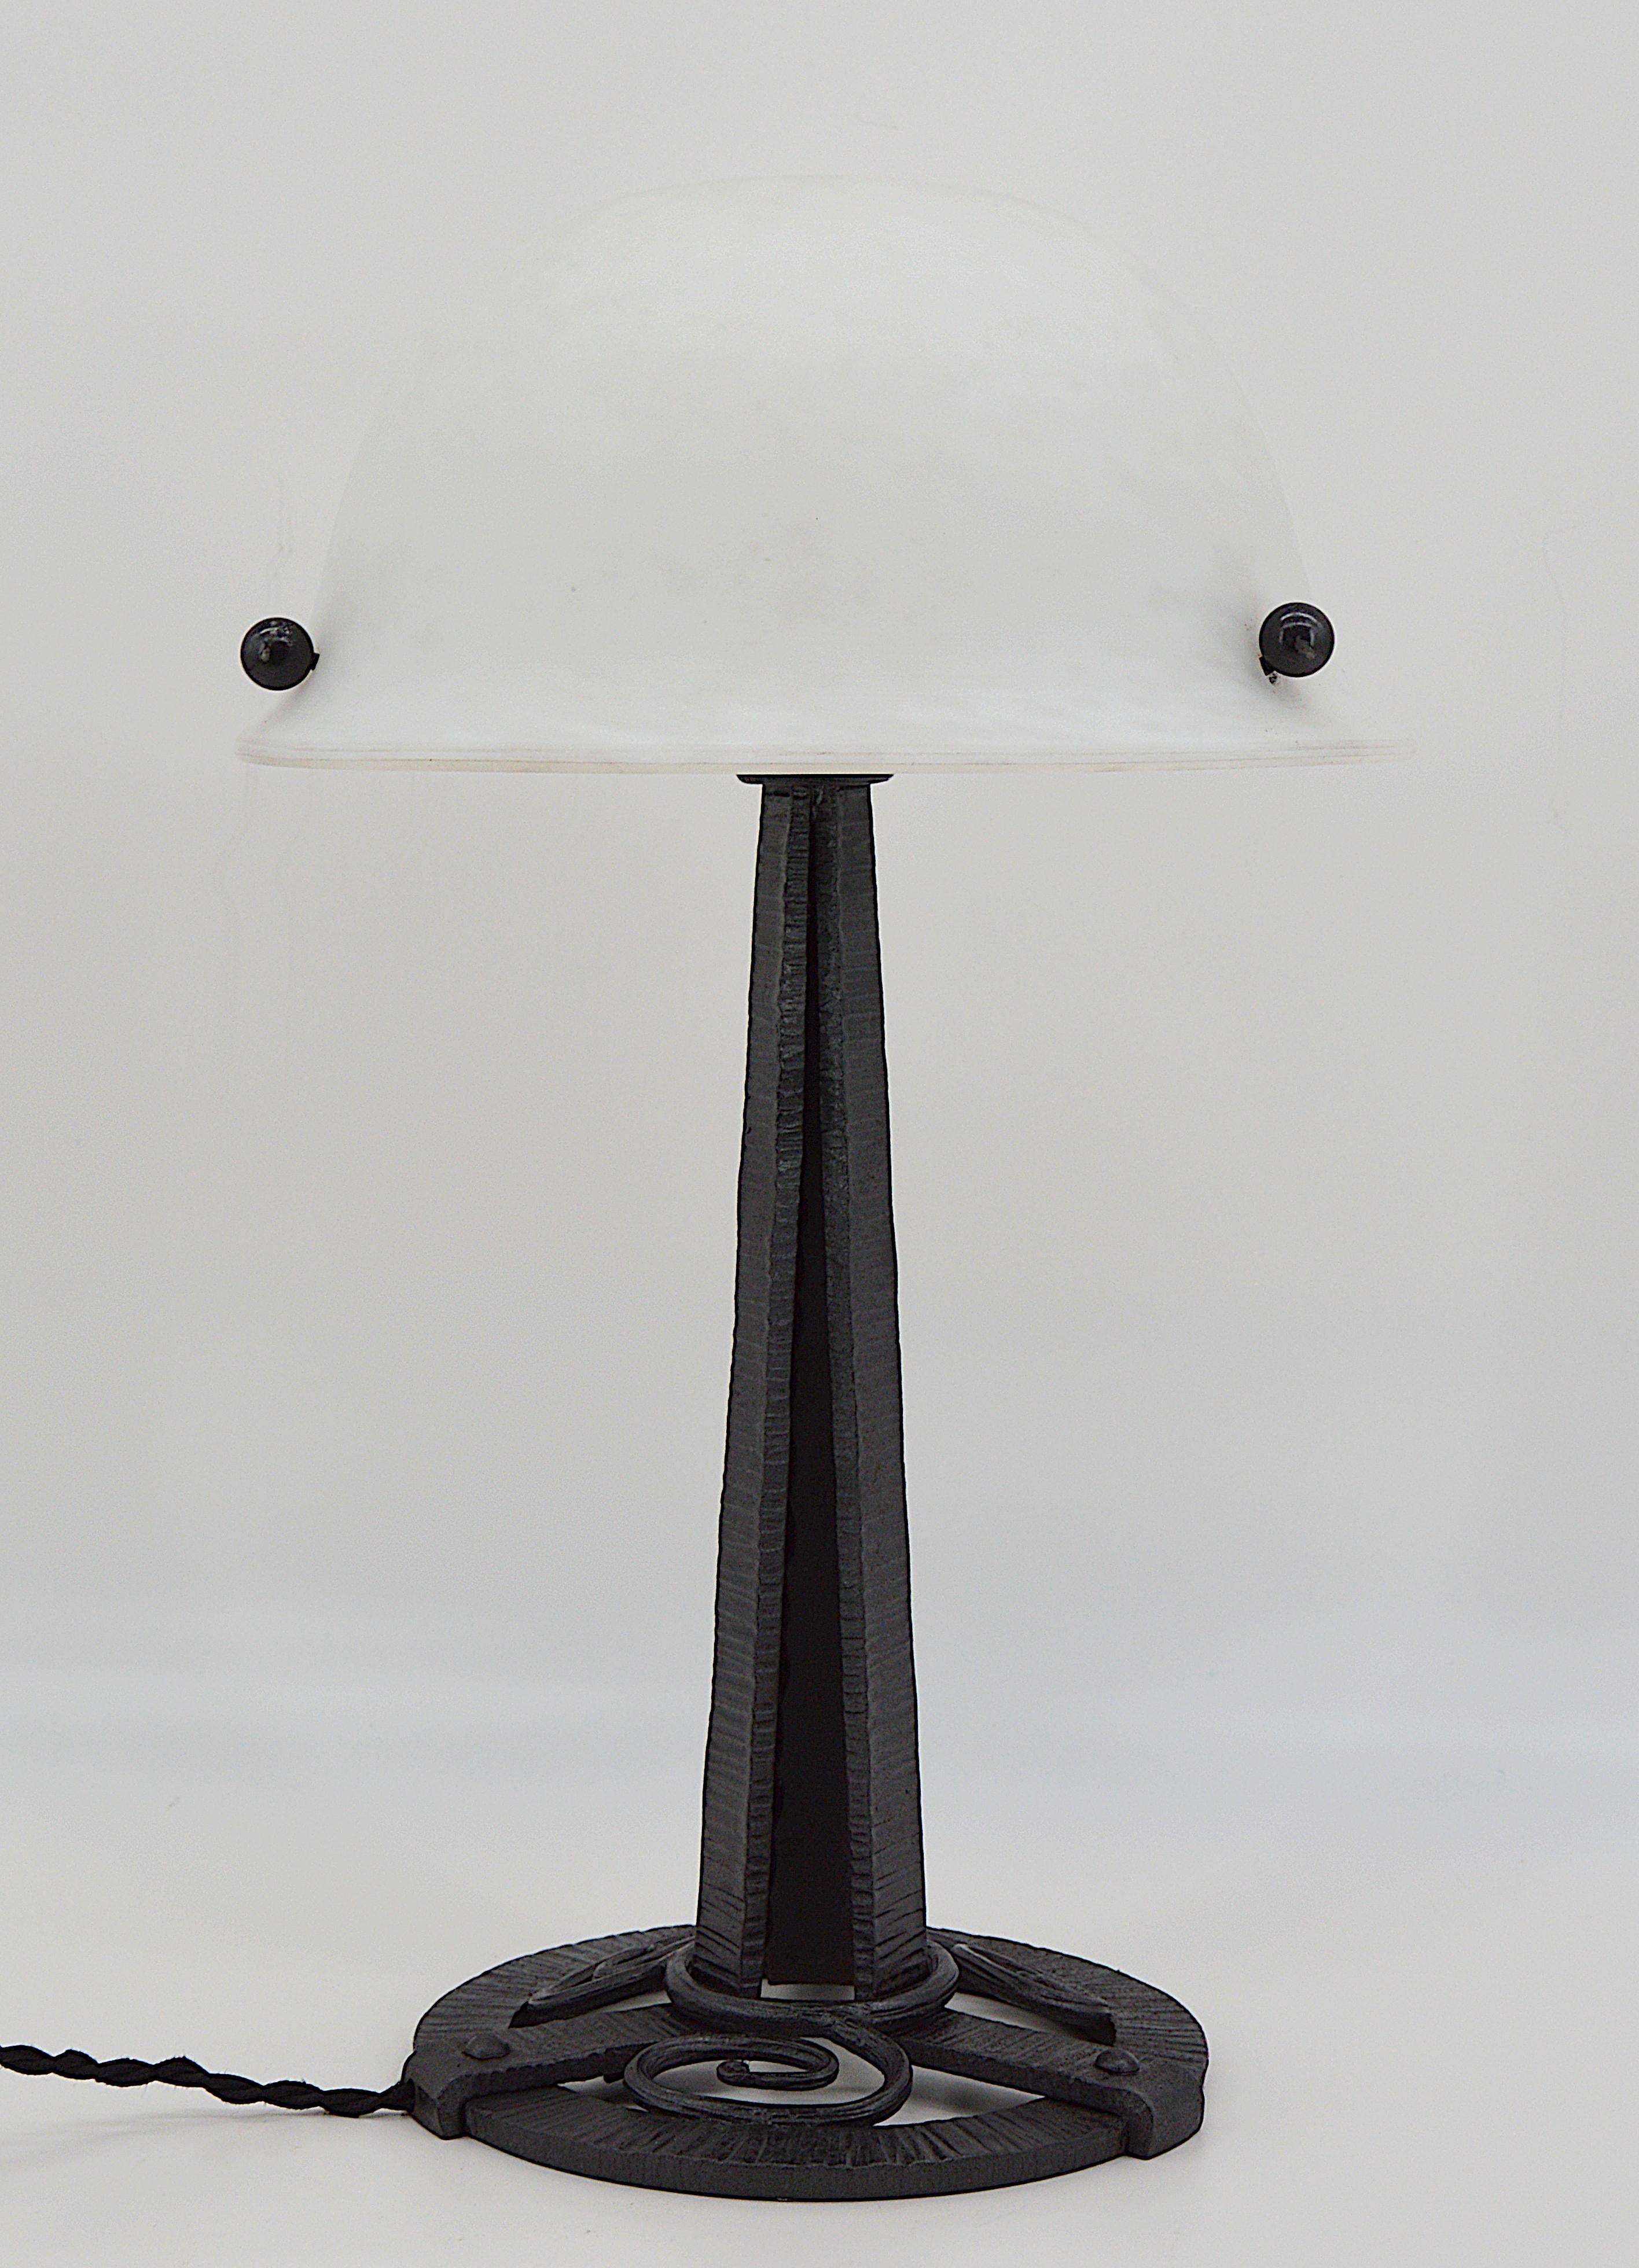 French Art Deco table lamp, France, circa 1925. Glass and wrought iron. Very nice lampshade in white mottled glass. Double glass, white enamels are applied between the two layers. On its wrought iron base. Same period as Daum, Schneider, Muller